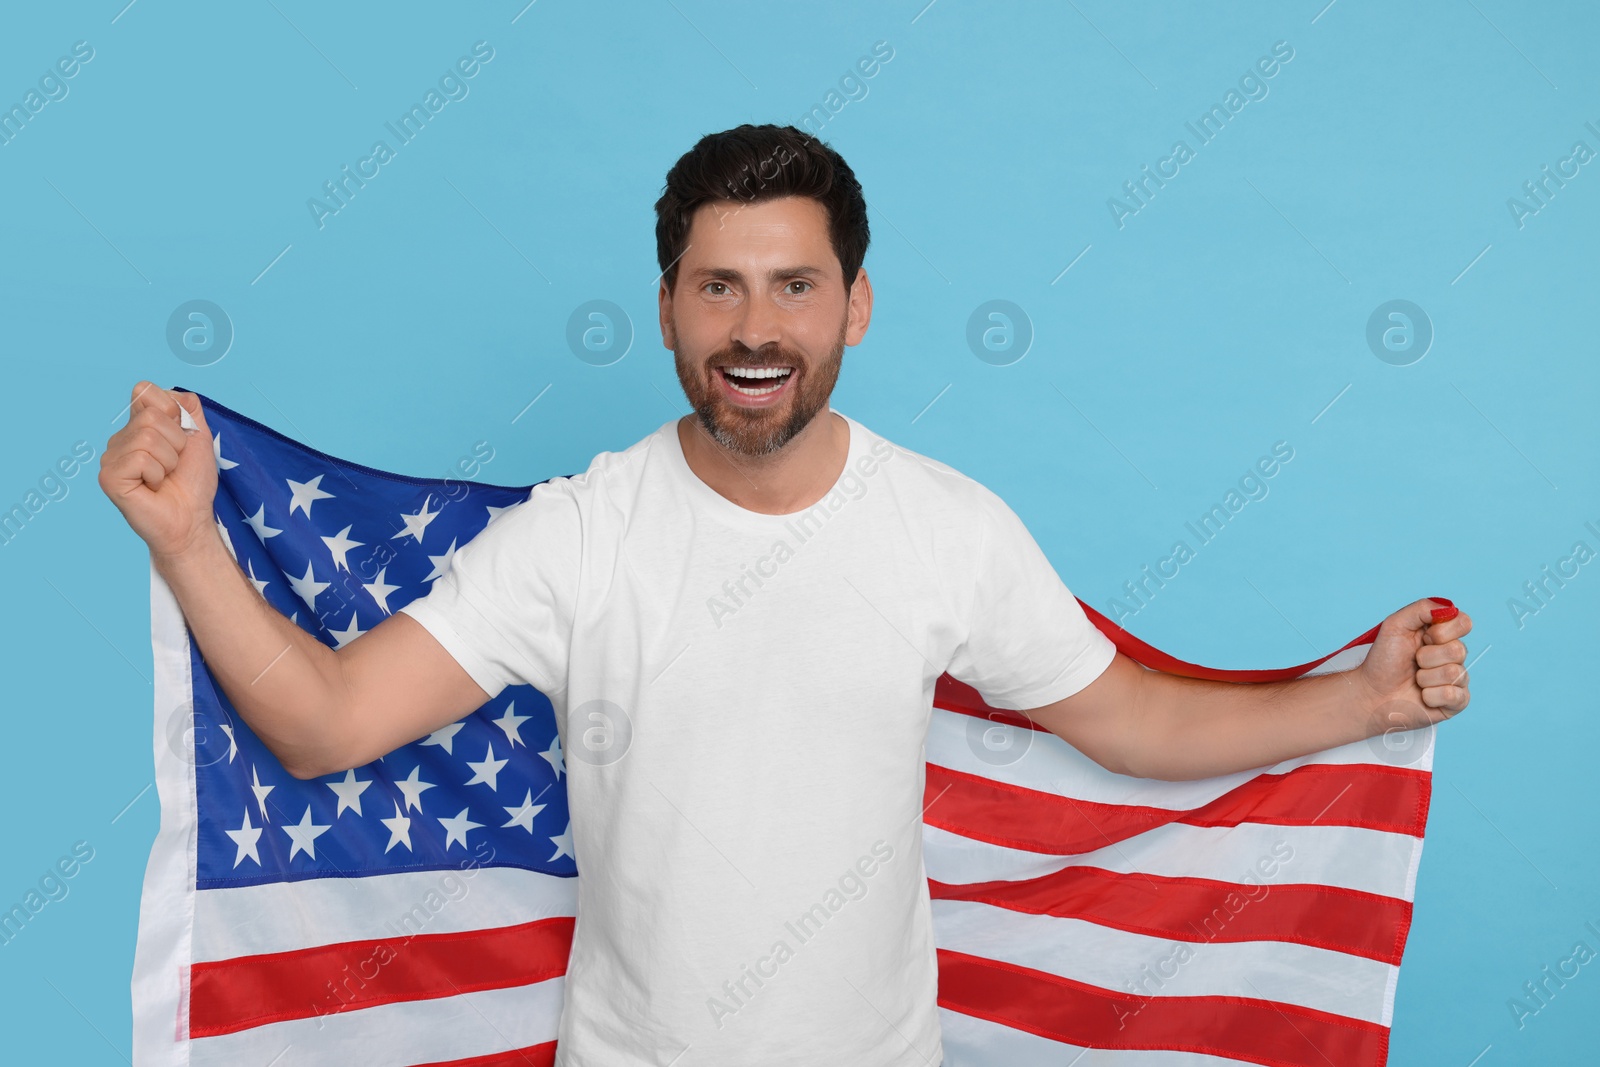 Photo of 4th of July - Independence Day of USA. Happy man with American flag on light blue background